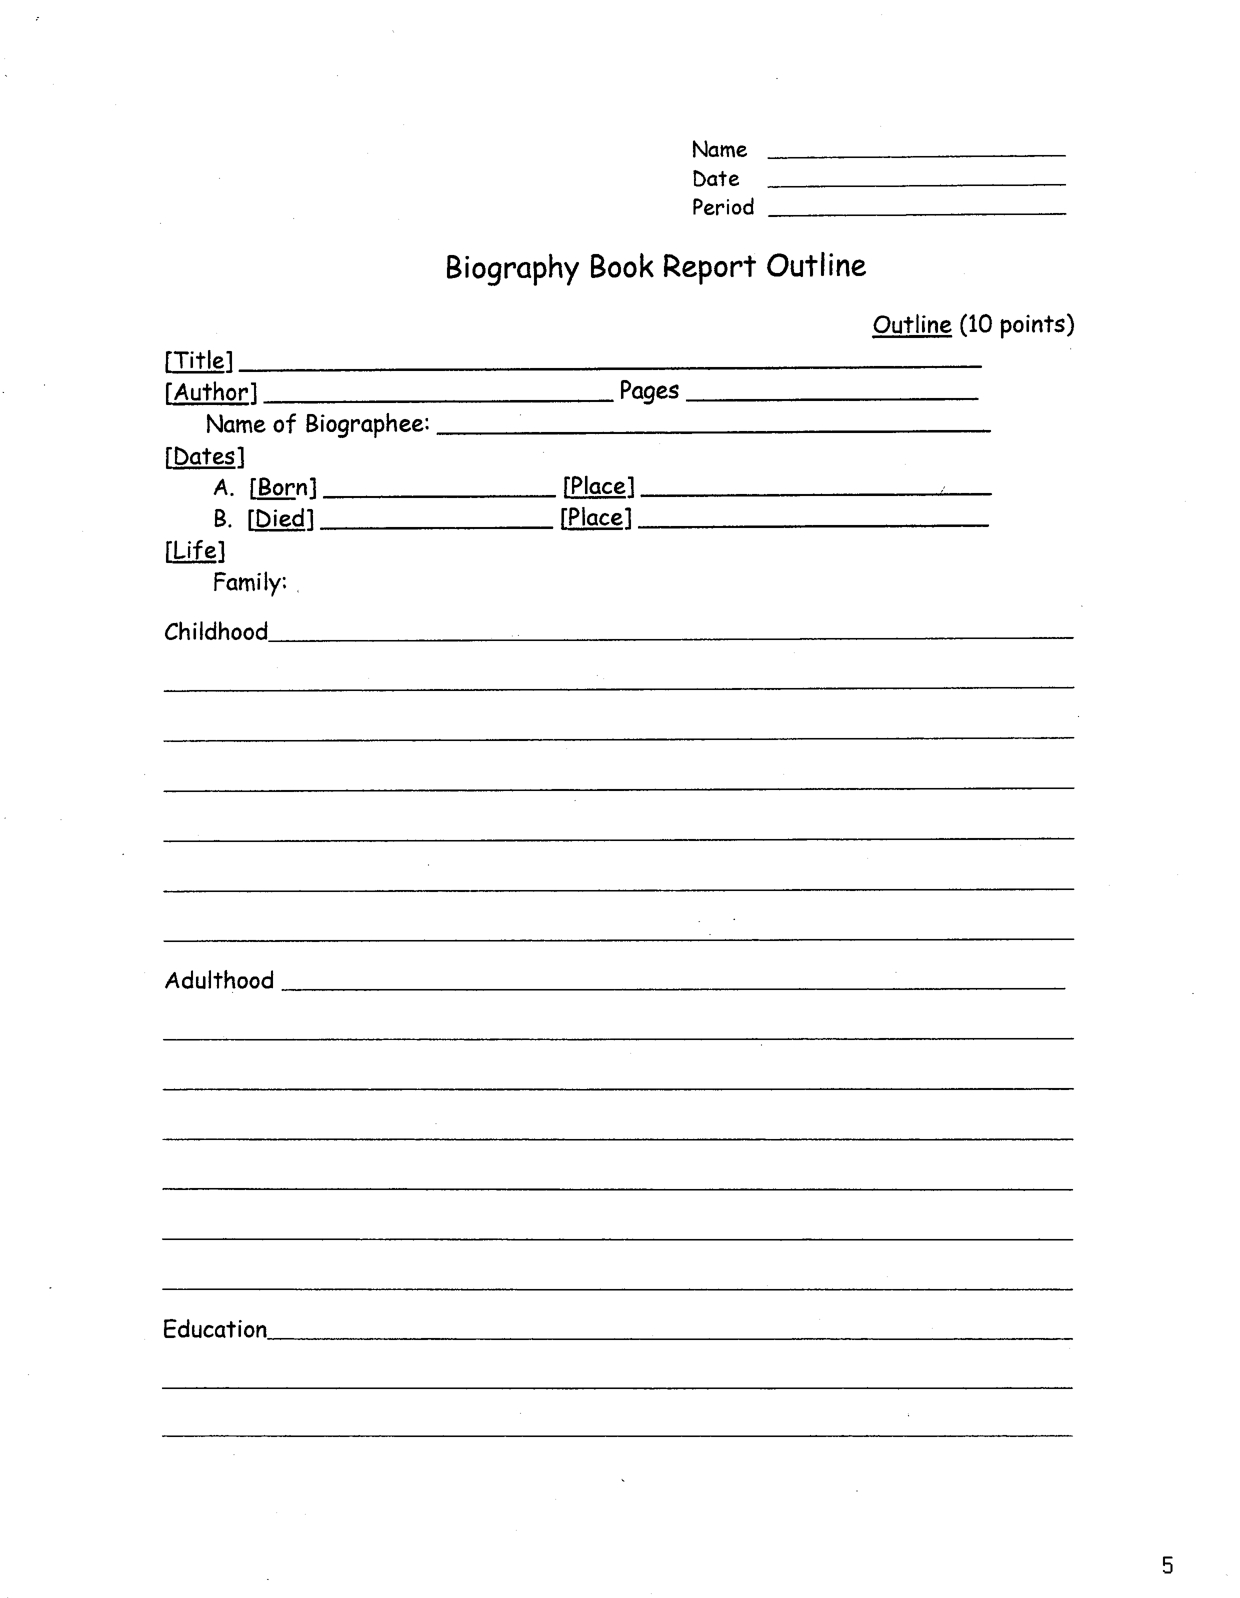 013 Biography Book Report Template Ideas Outline 83330 Pertaining To Book Report Template 5Th Grade